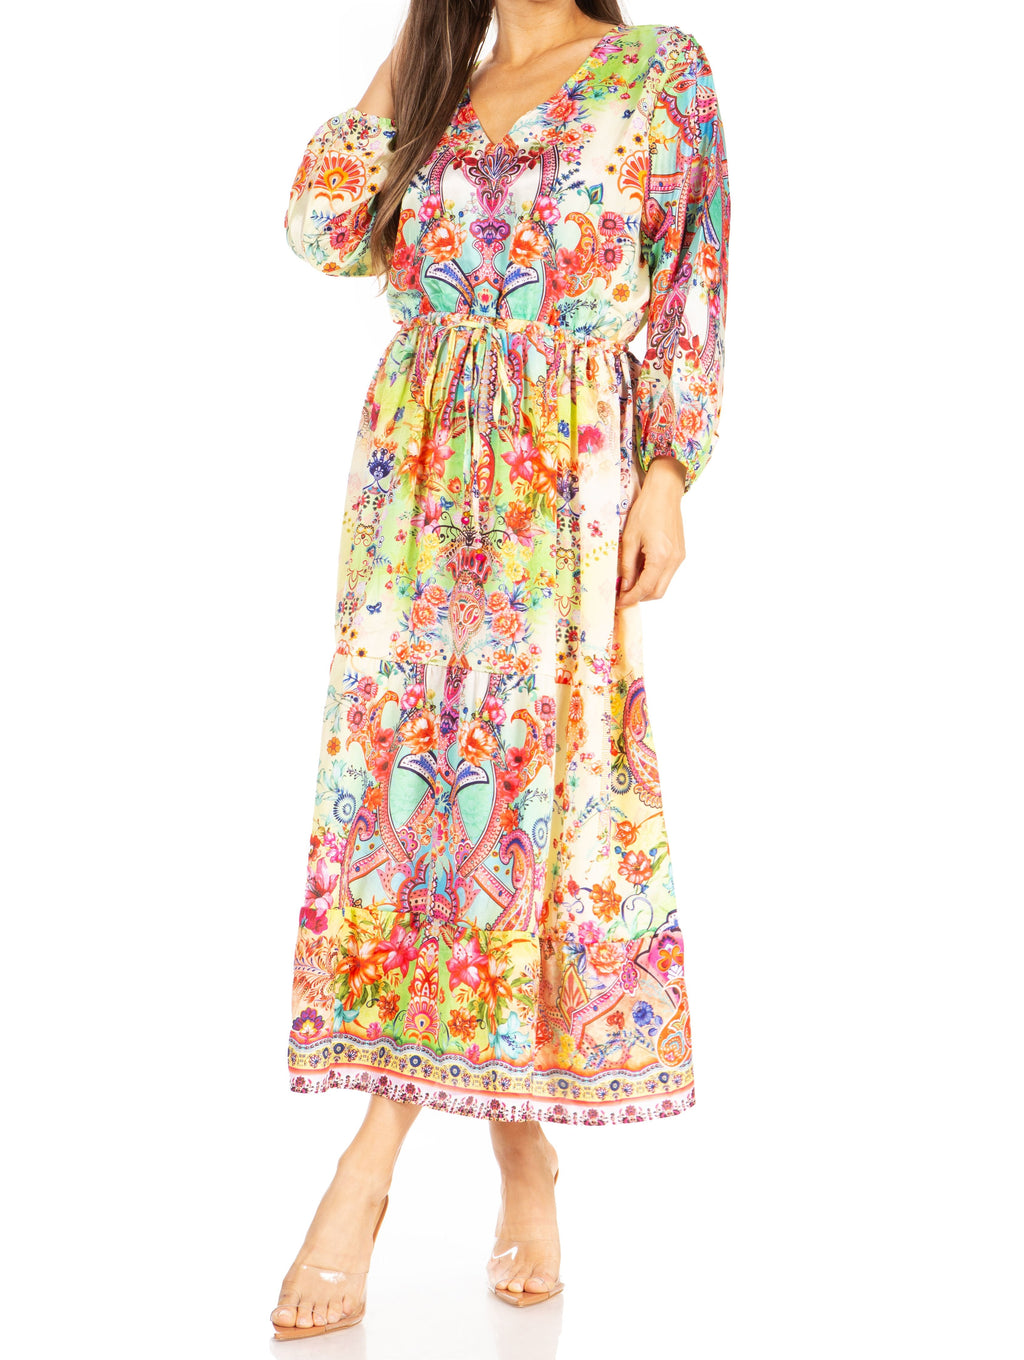 Pin by Stumps&Thistles on My Style  Peasant dress, Long sleeve maxi dress,  Floral knit top